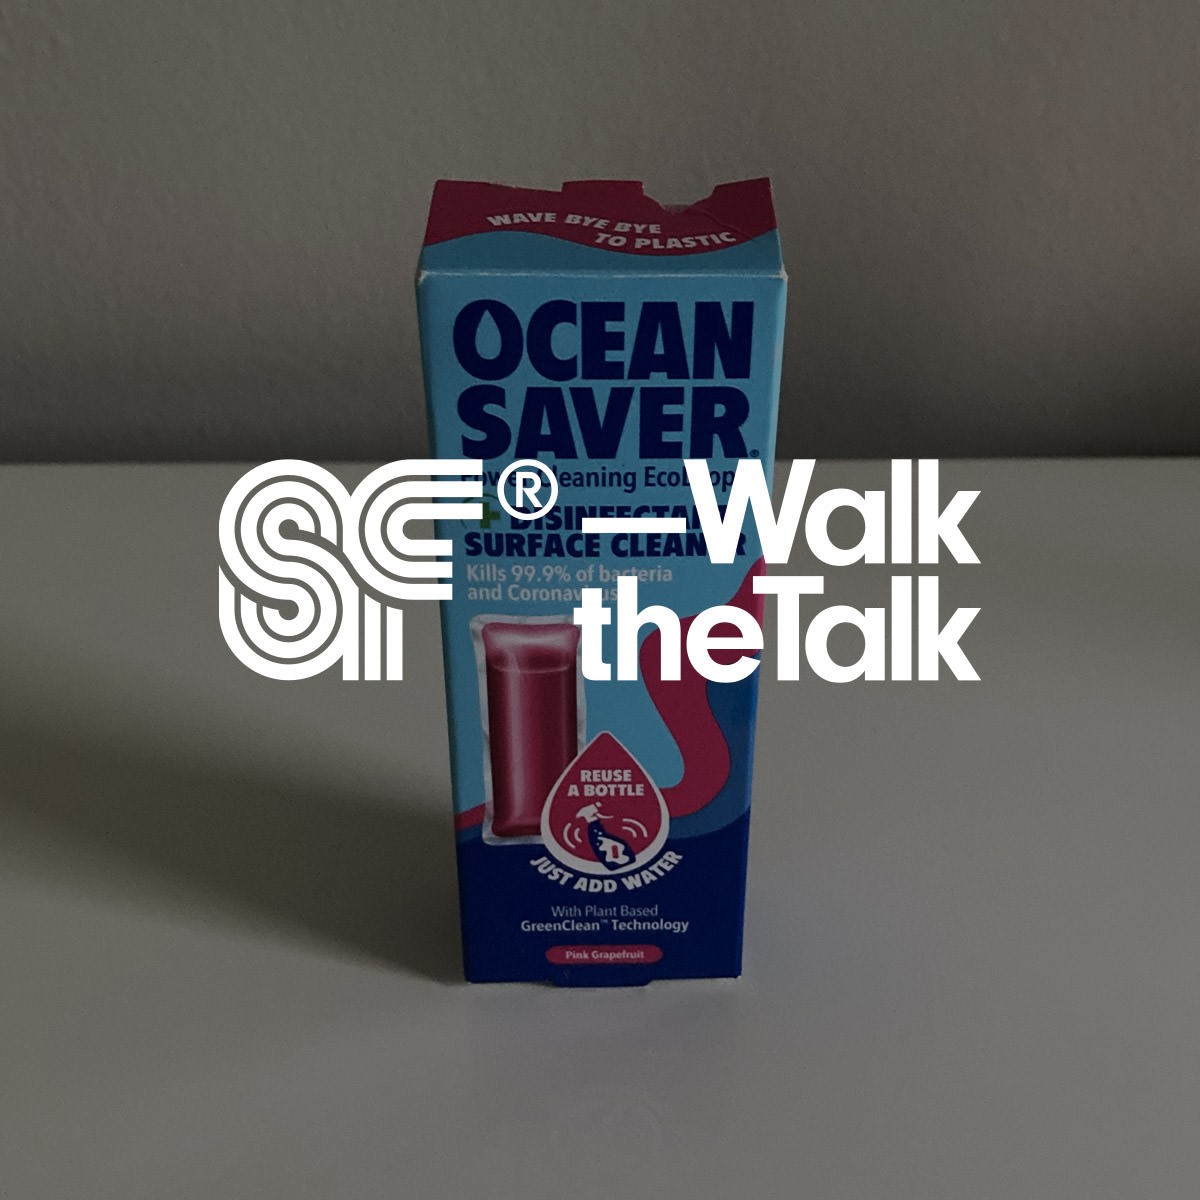 Superfried – Walk the Talk logo. Testing EcoDrops from Ocean Saver. Continuing my path towards eco living.